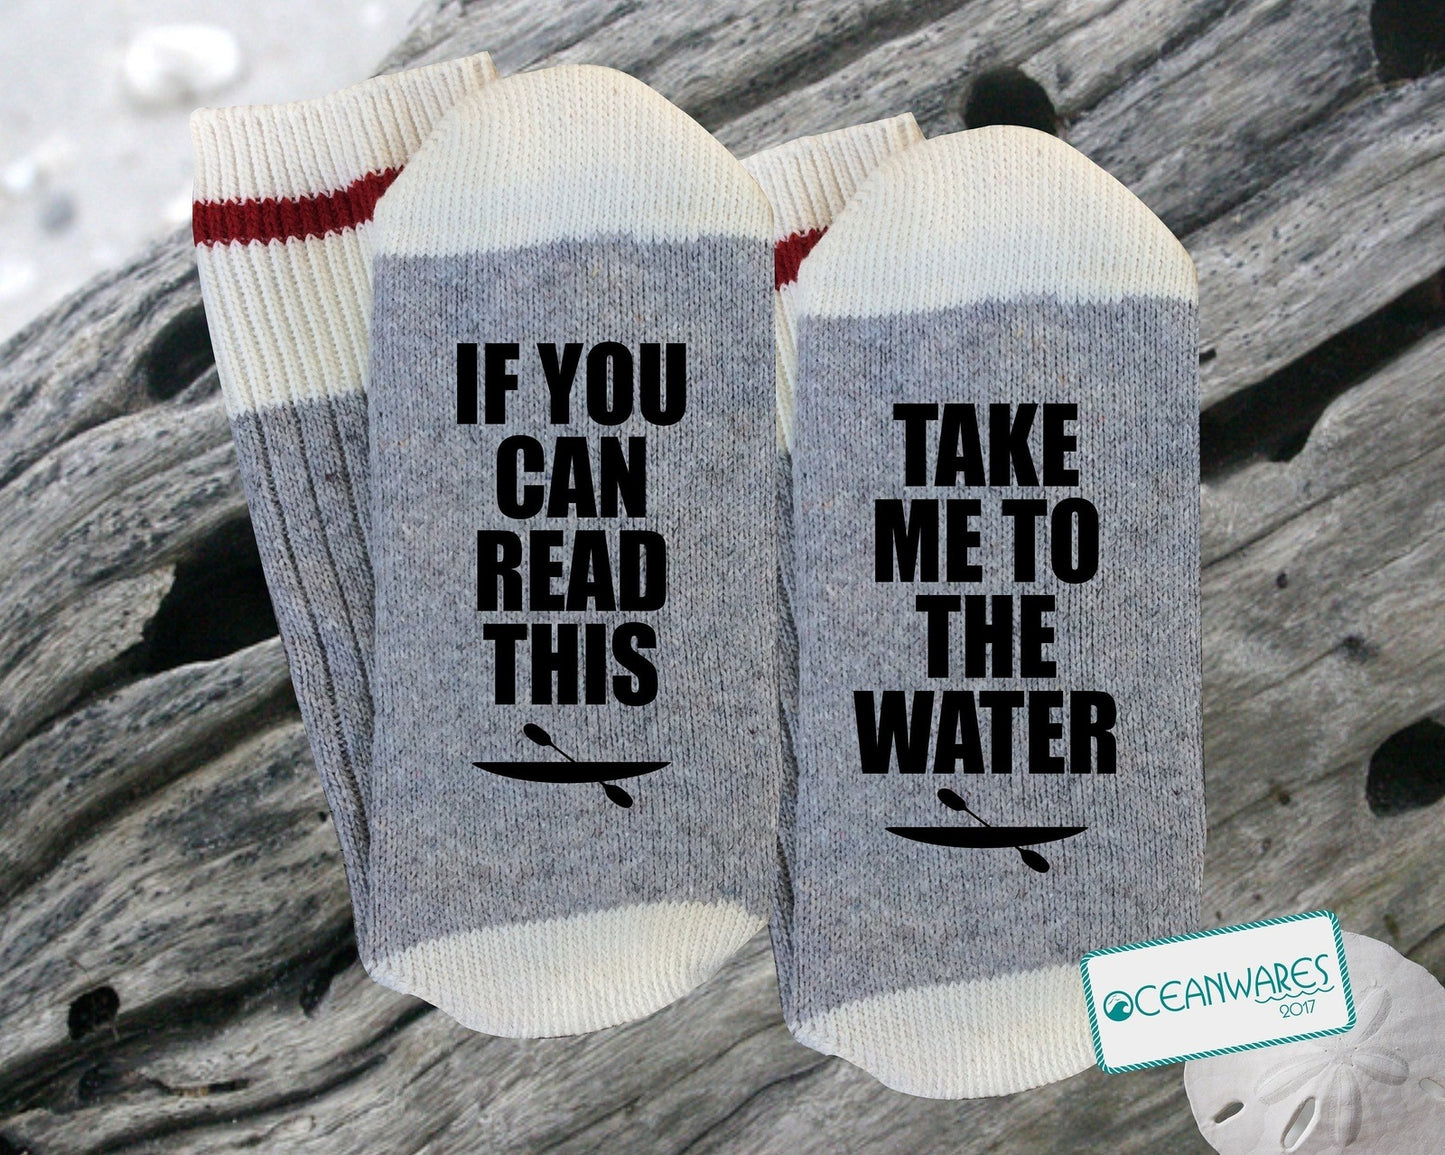 Kayak Gift, Take me to the water, SUPER SOFT NOVELTY WORD SOCKS.